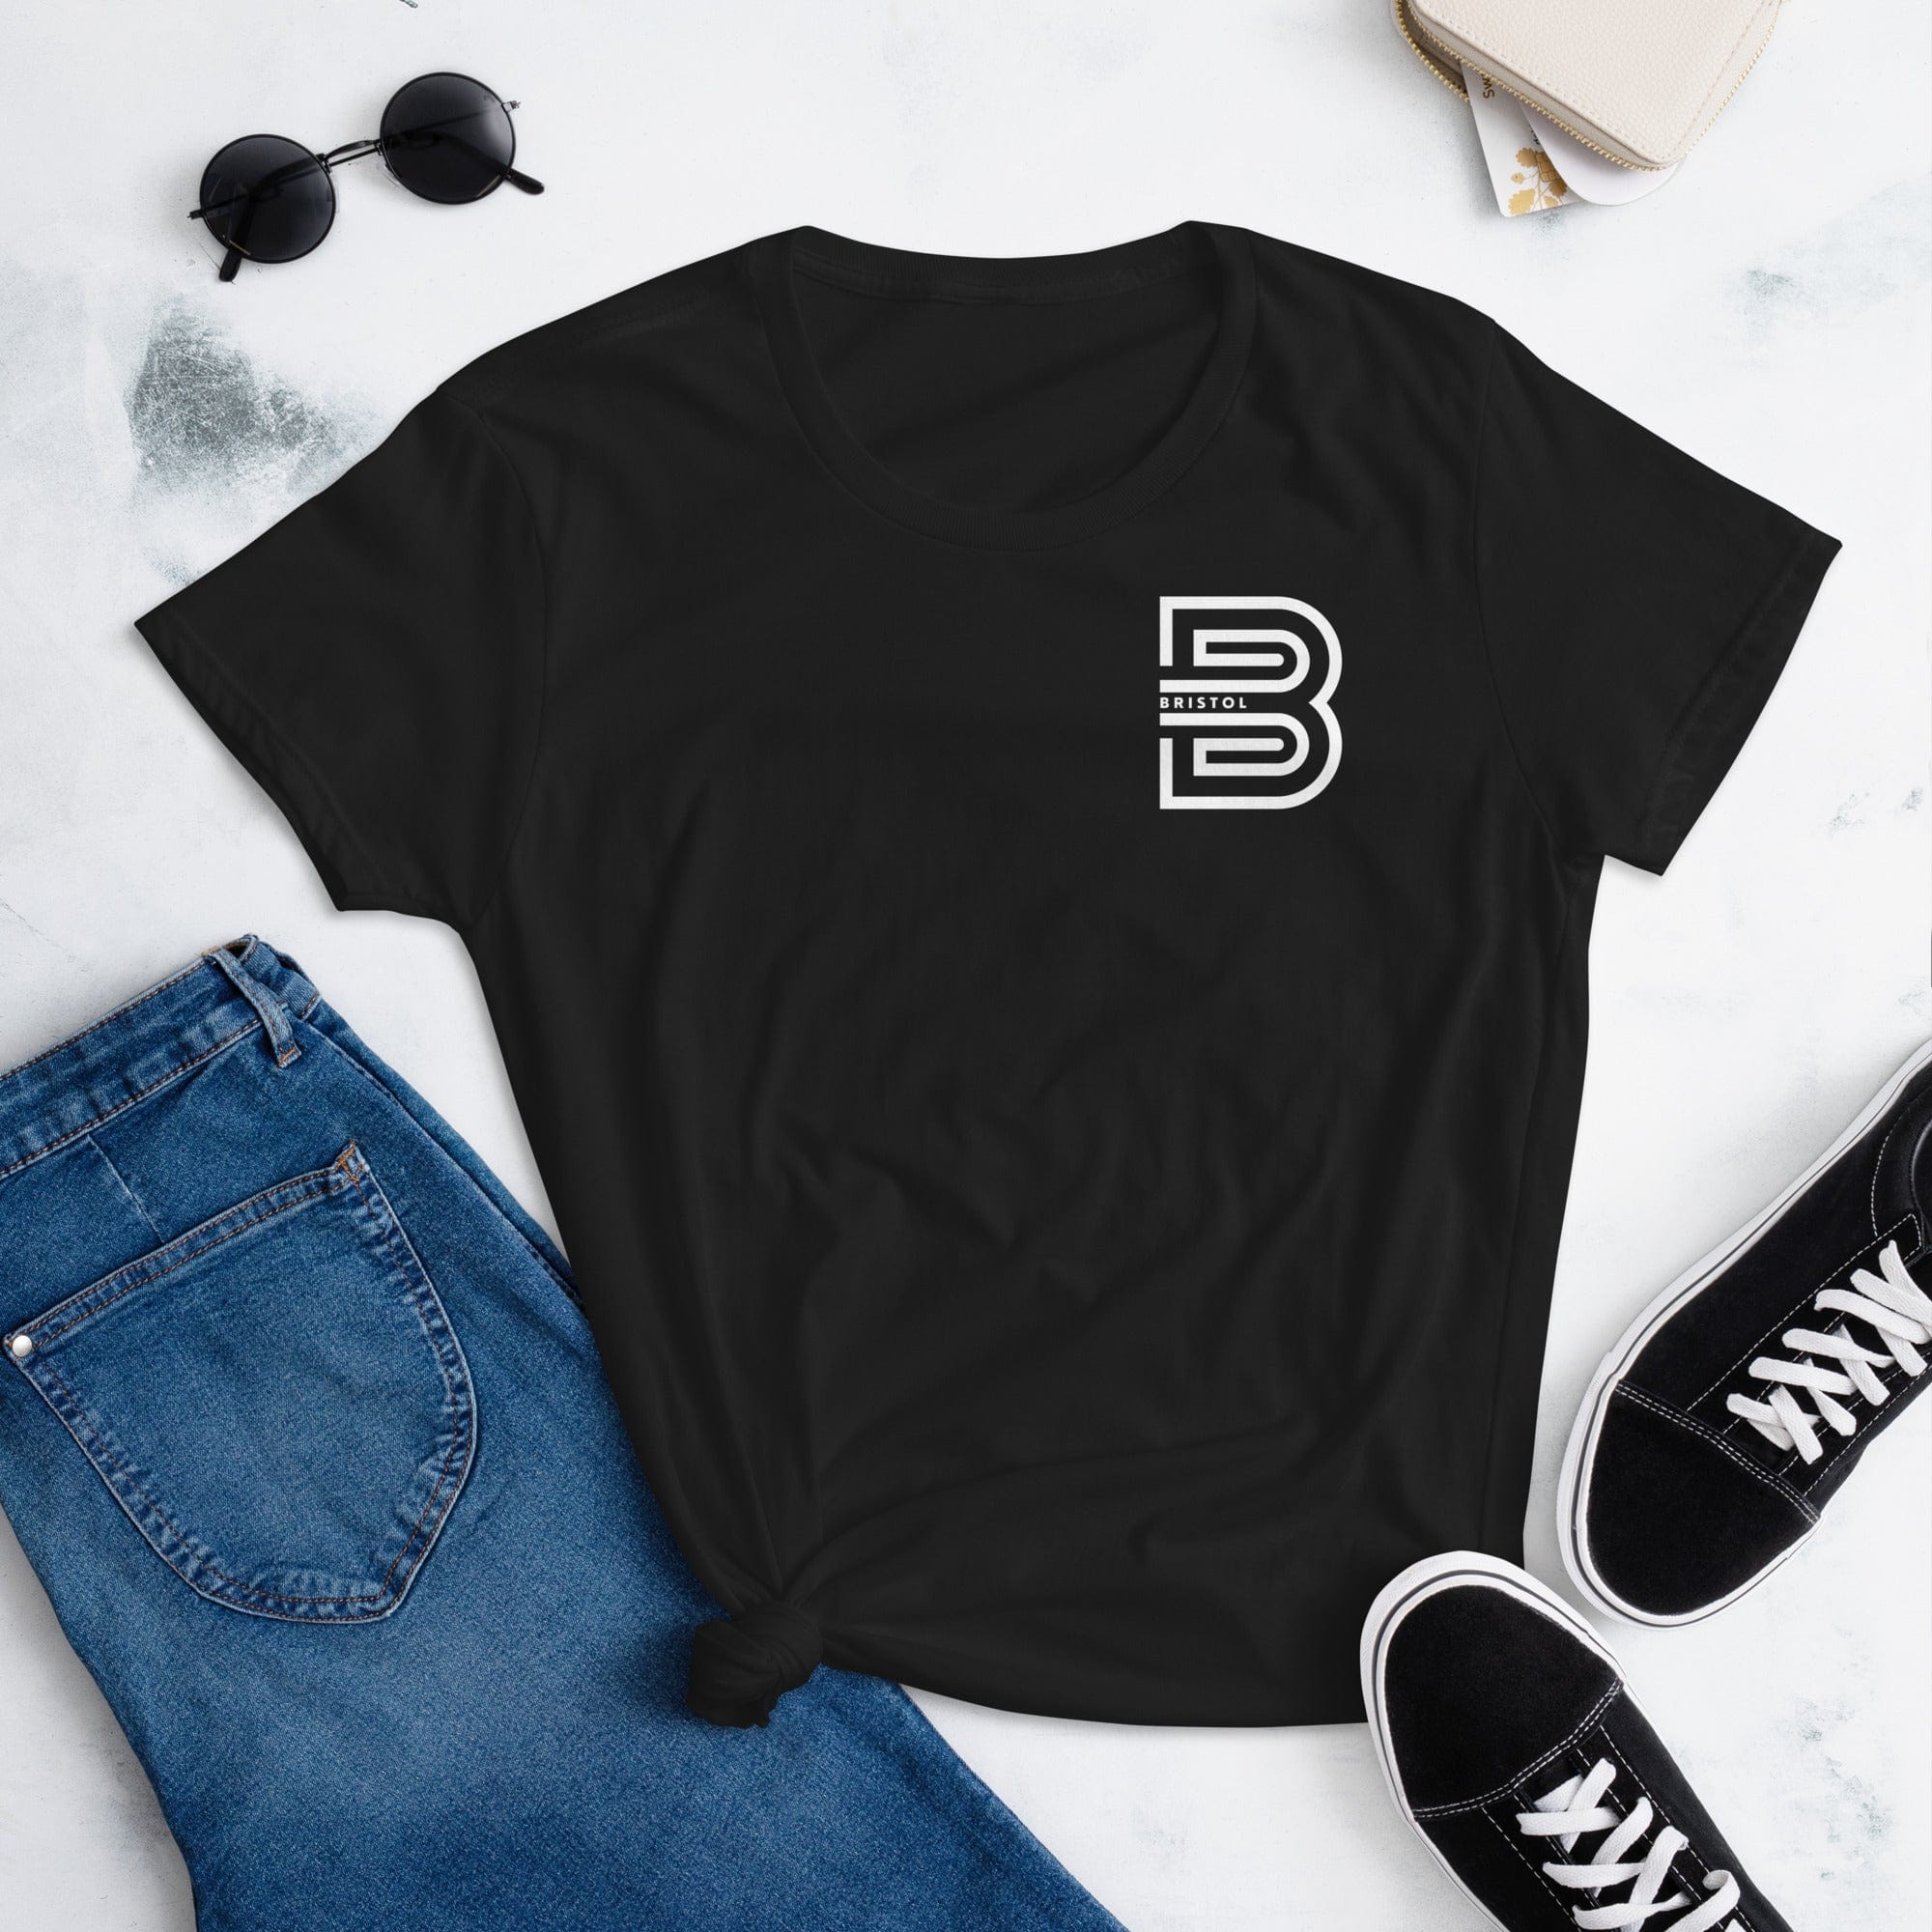 Our Bristol Shop is a collection of apparel and gifts celebrating Bristol, England. It includes our popular Bristol B tshirts, sweatshirts, hoodies, and long-sleeve shirts, as well as Bristol Ancient Modern Love items. Represent Bristol in style.